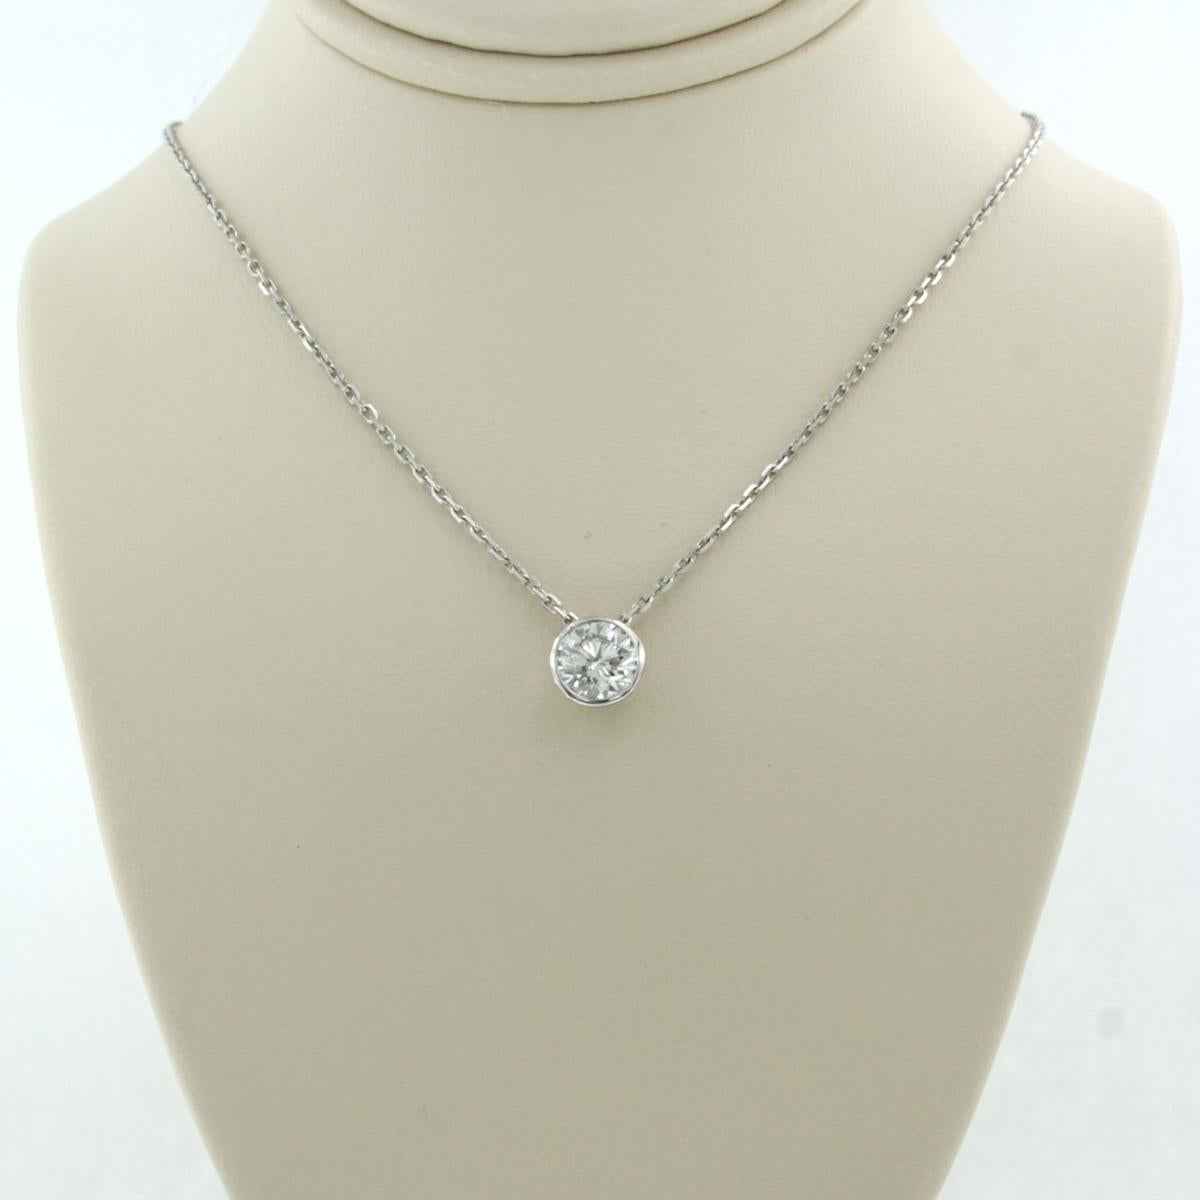 Diamond Gold Necklace, 1.01 carat Diamond 14k Gold

The necklace is 38 cm long (15 inch) and 0.8 mm wide (0.03 inch)
The pendant is approx. 0.7 cm heigh (0.3 inch) and 0.7 cm wide (0.3 inch)
Total weight is 2.8 grams (0.1 oz)

Set with

Diamonds

-